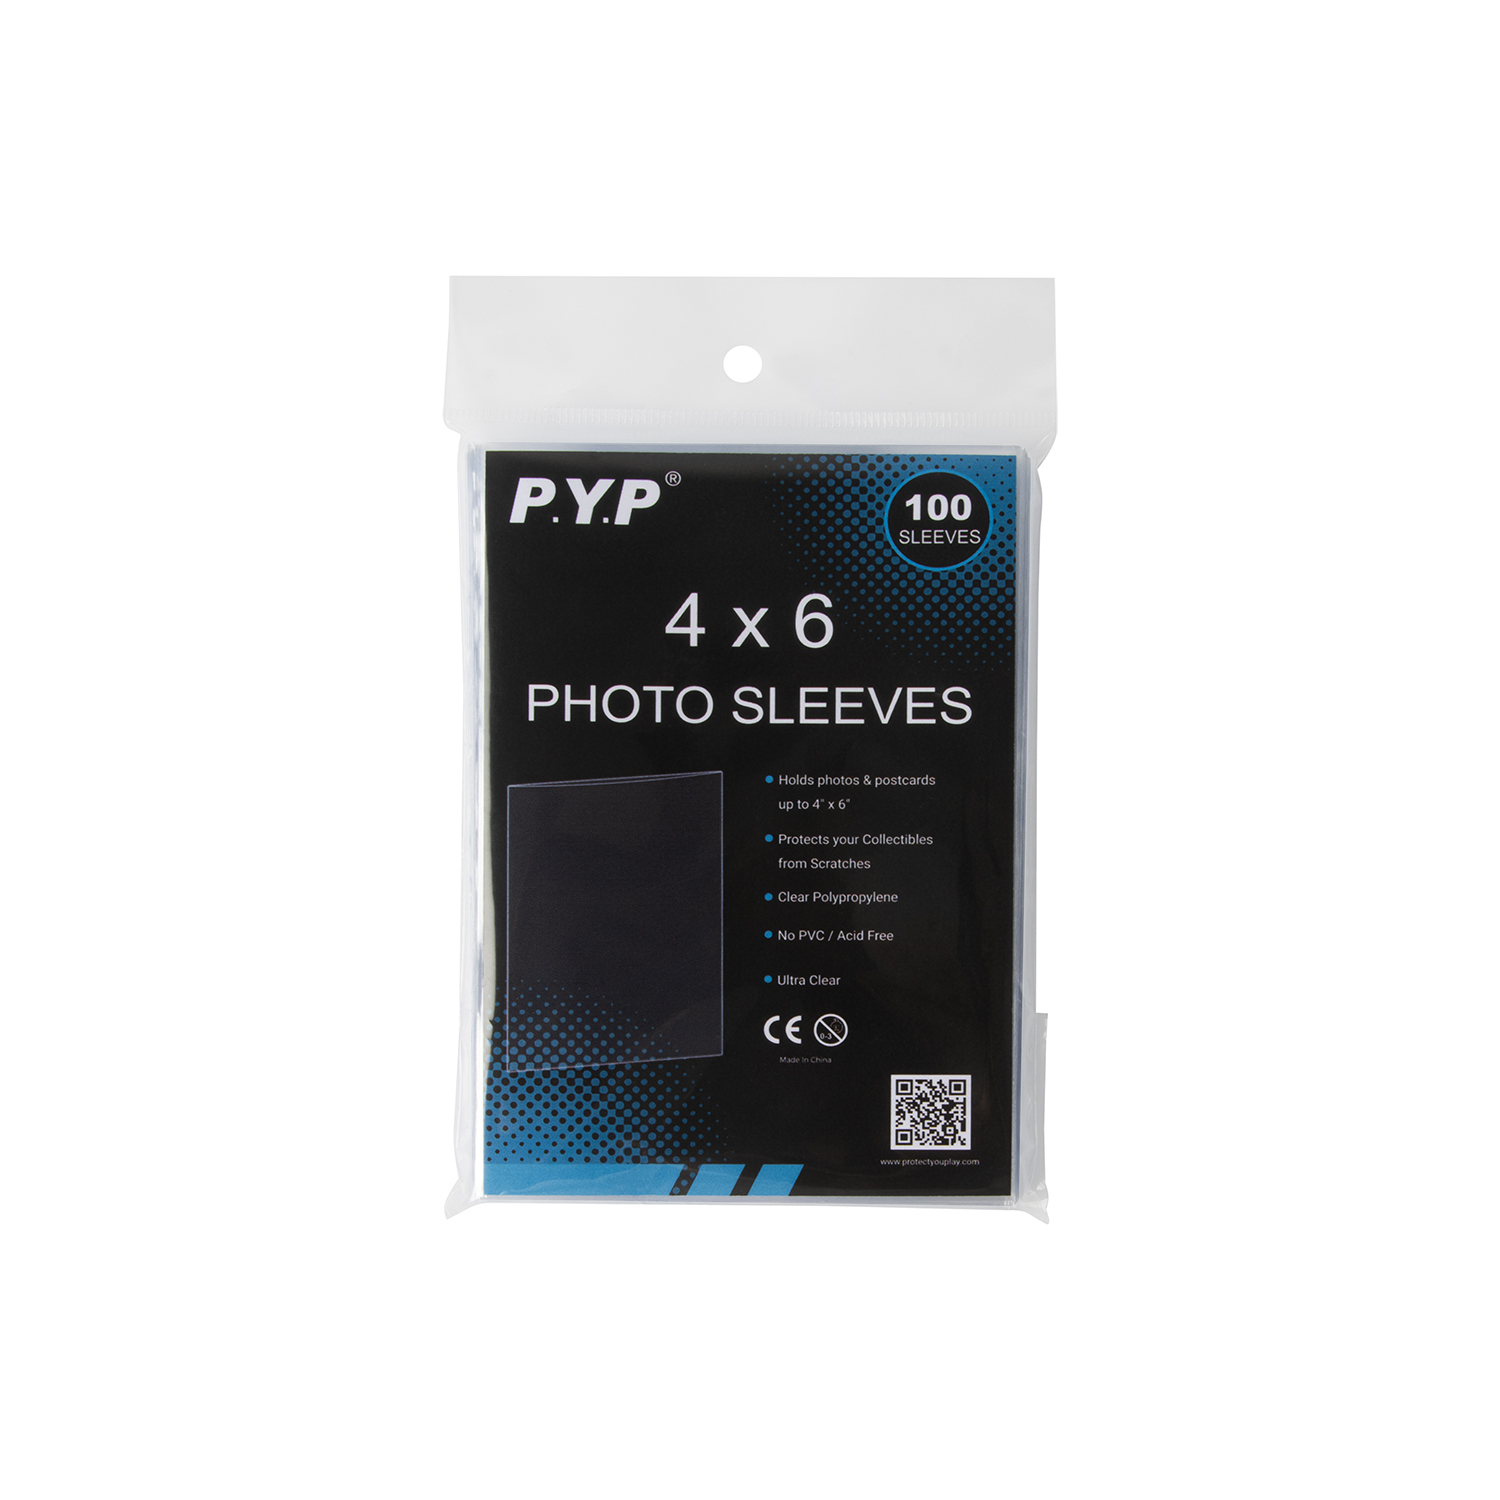 4x6 Photo Sleeves Crystal Clear Archival Plastic Soft Sleeves